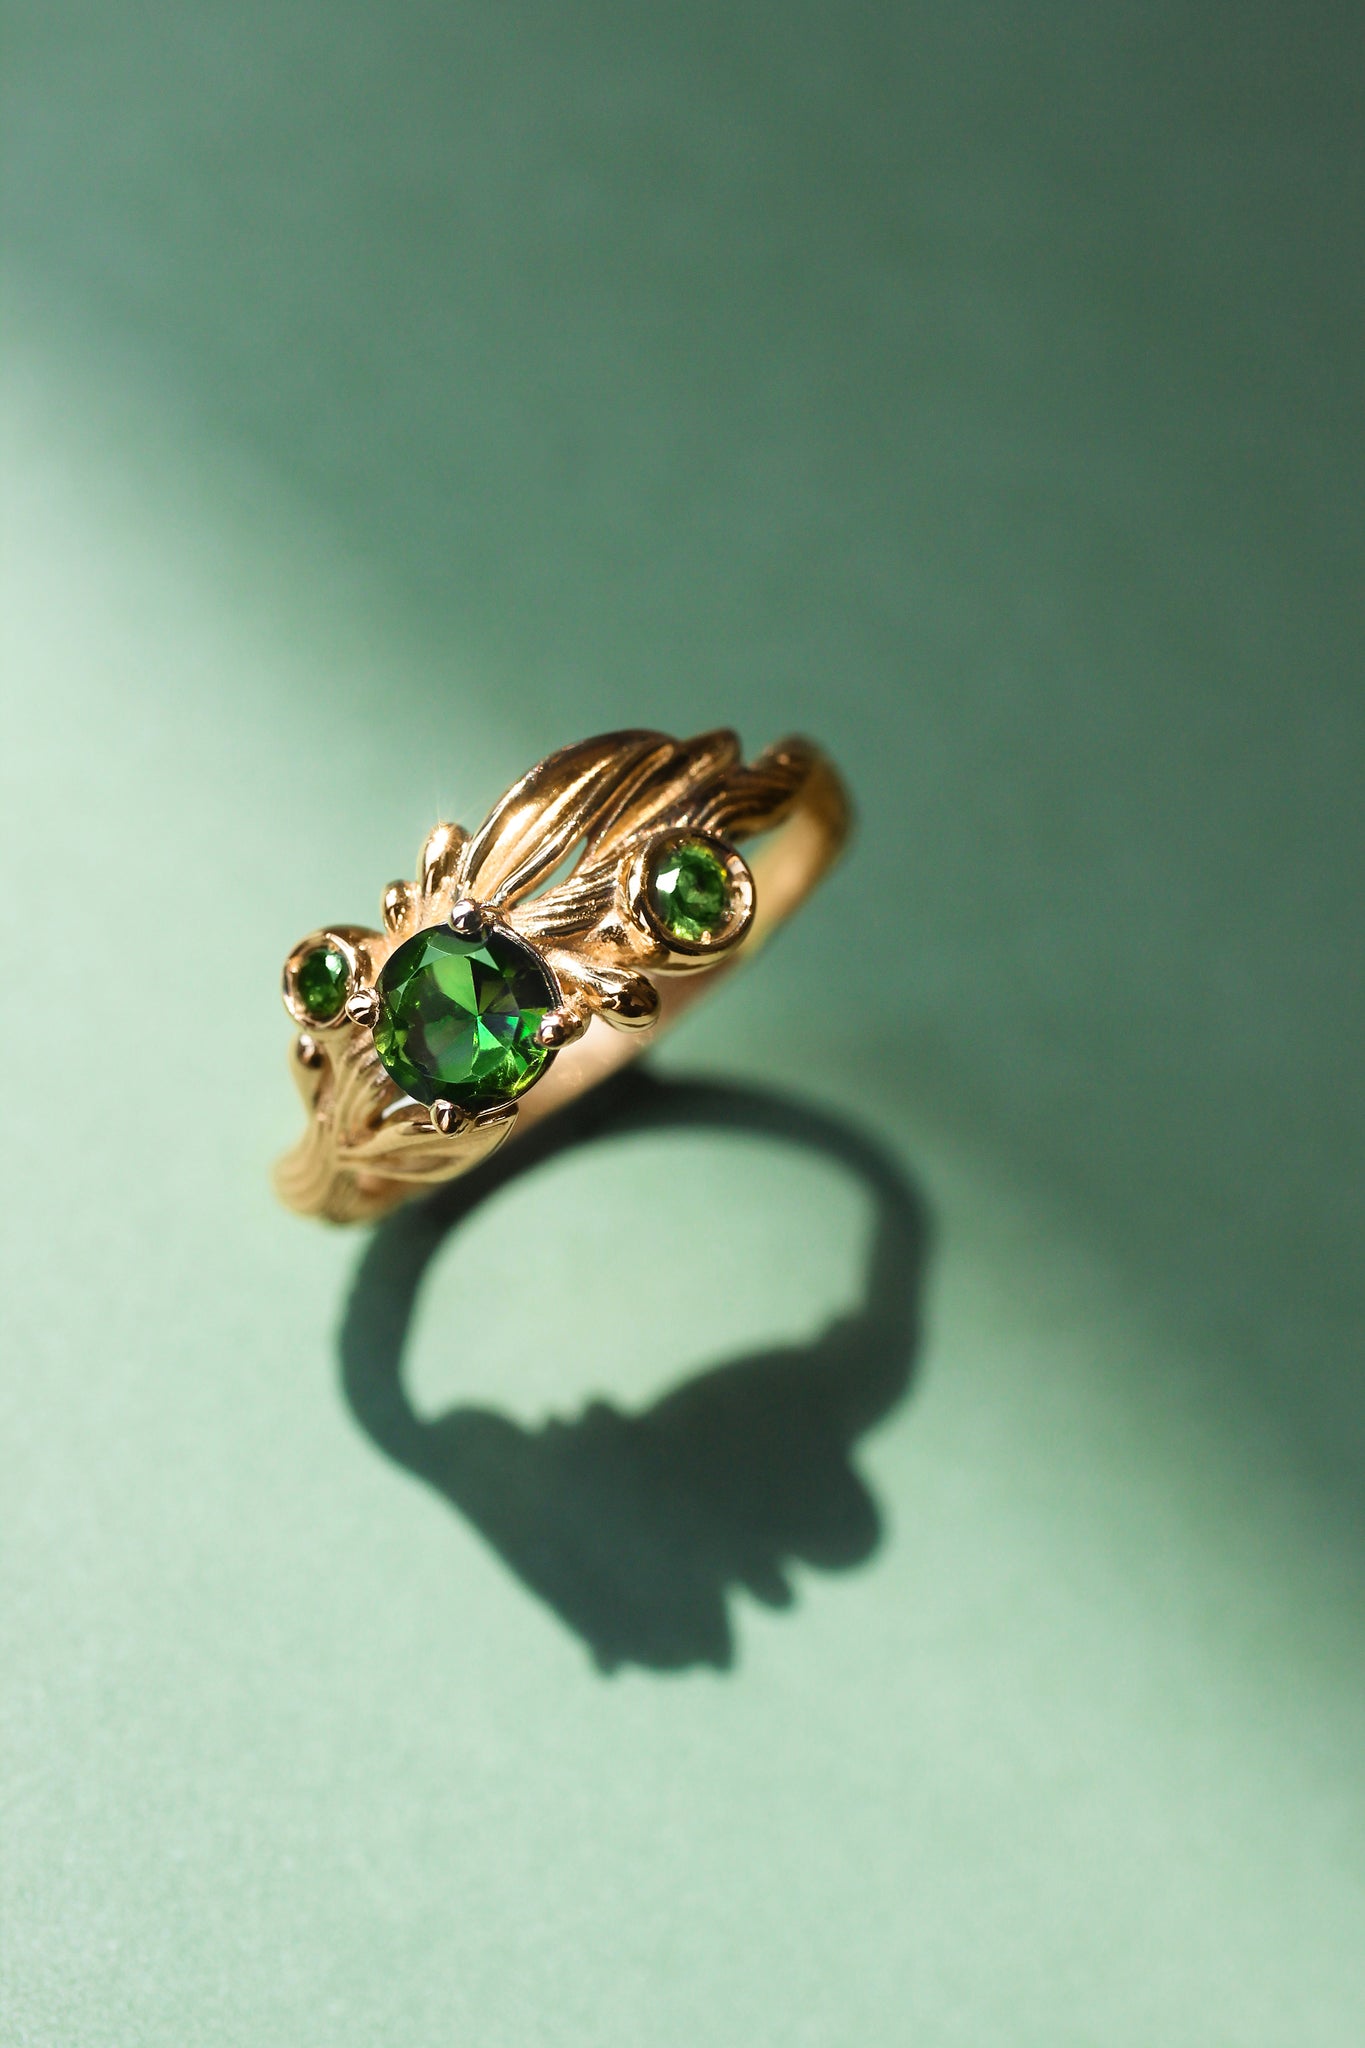 Olive branch ring with green tourmalines / Olivia - Eden Garden Jewelry™